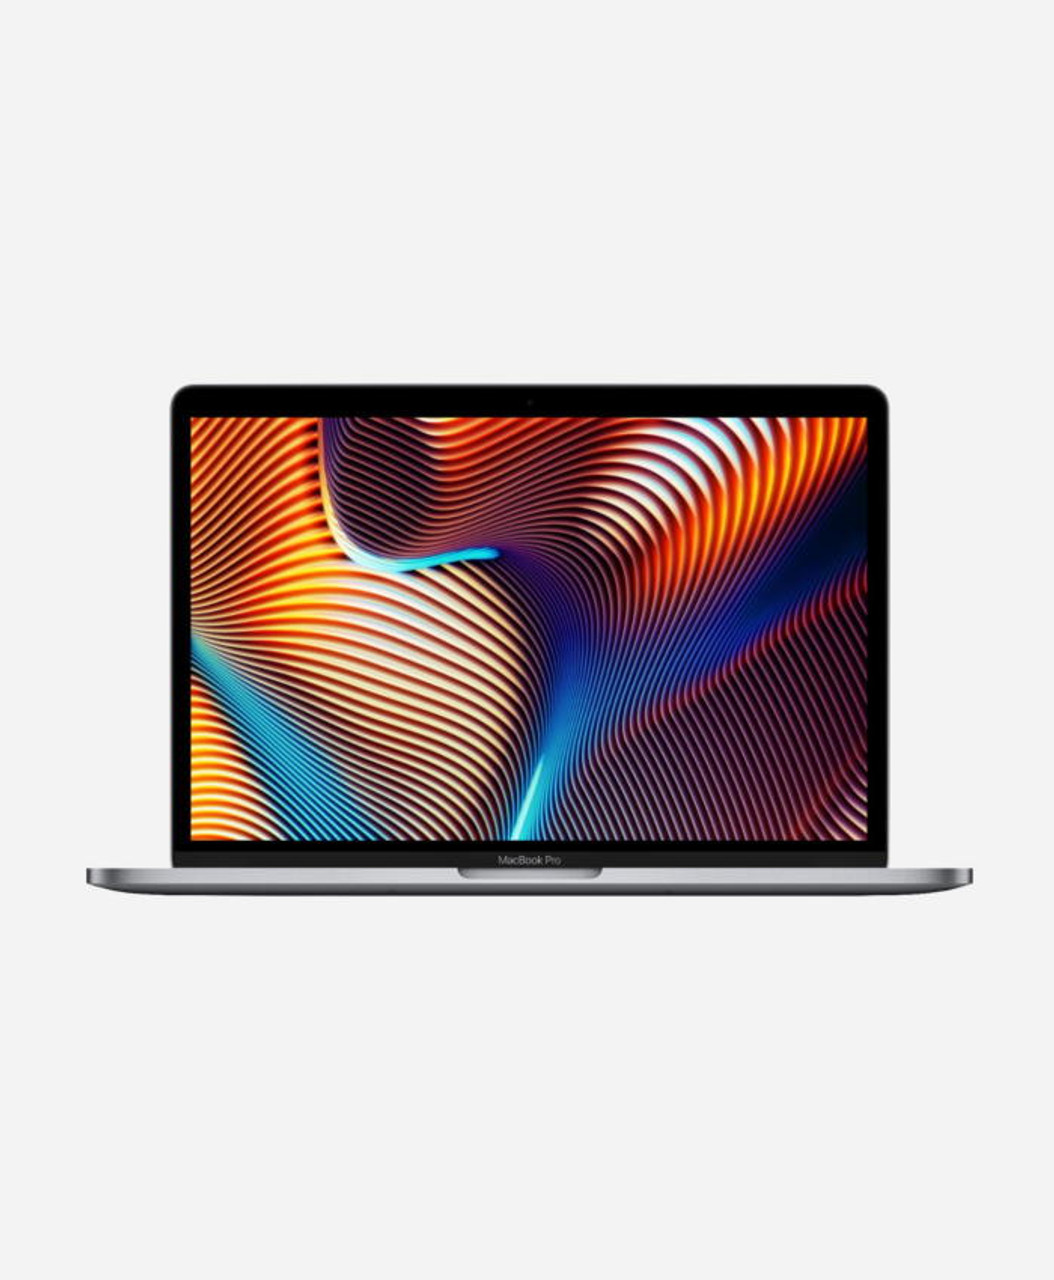 Used Apple Macbook Pro 13.3-inch (Retina, Space Gray, Touch Bar) 1.4Ghz  Quad Core i5 (2019) MUHN2LL/A GainSaver